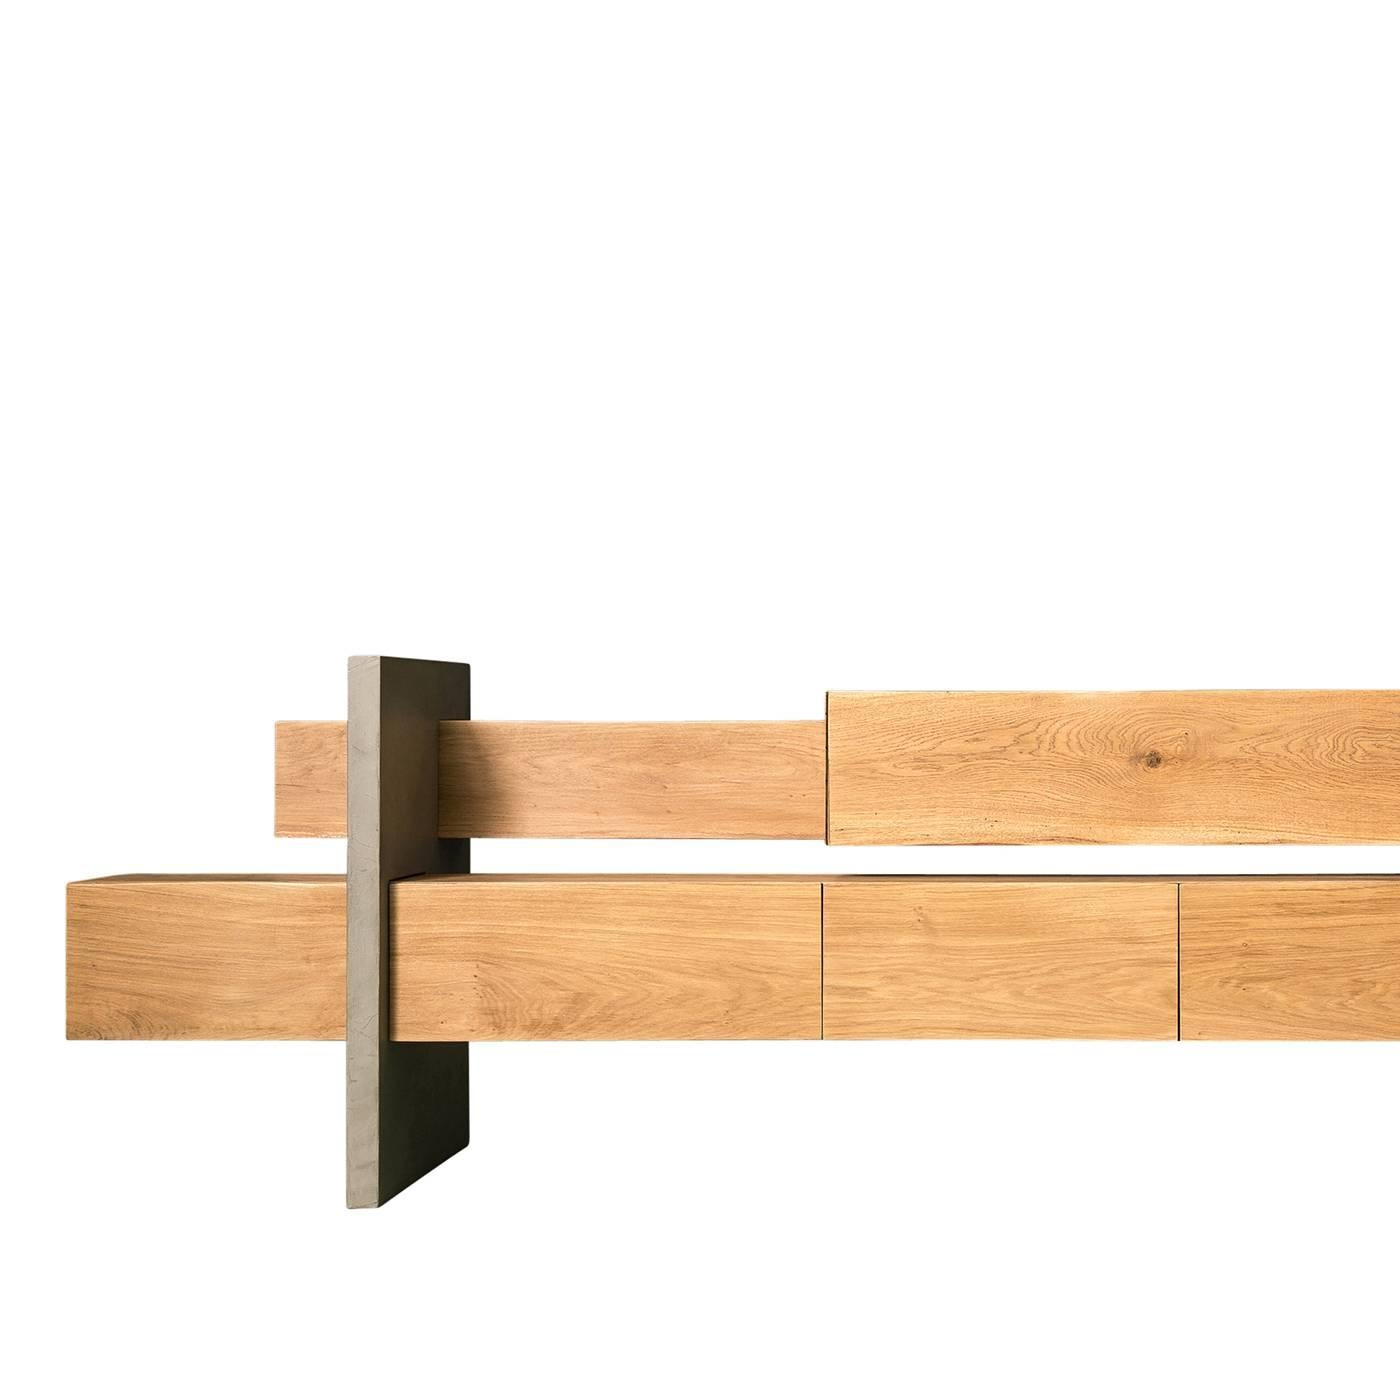 Within this oak and concrete sideboard by Giacomo Moor are six unevenly arranged storage compartments. In the lower beam there are two swinging doors, a double depth drawer, and a drawer and a white varnished compartment. In the top beam, there are